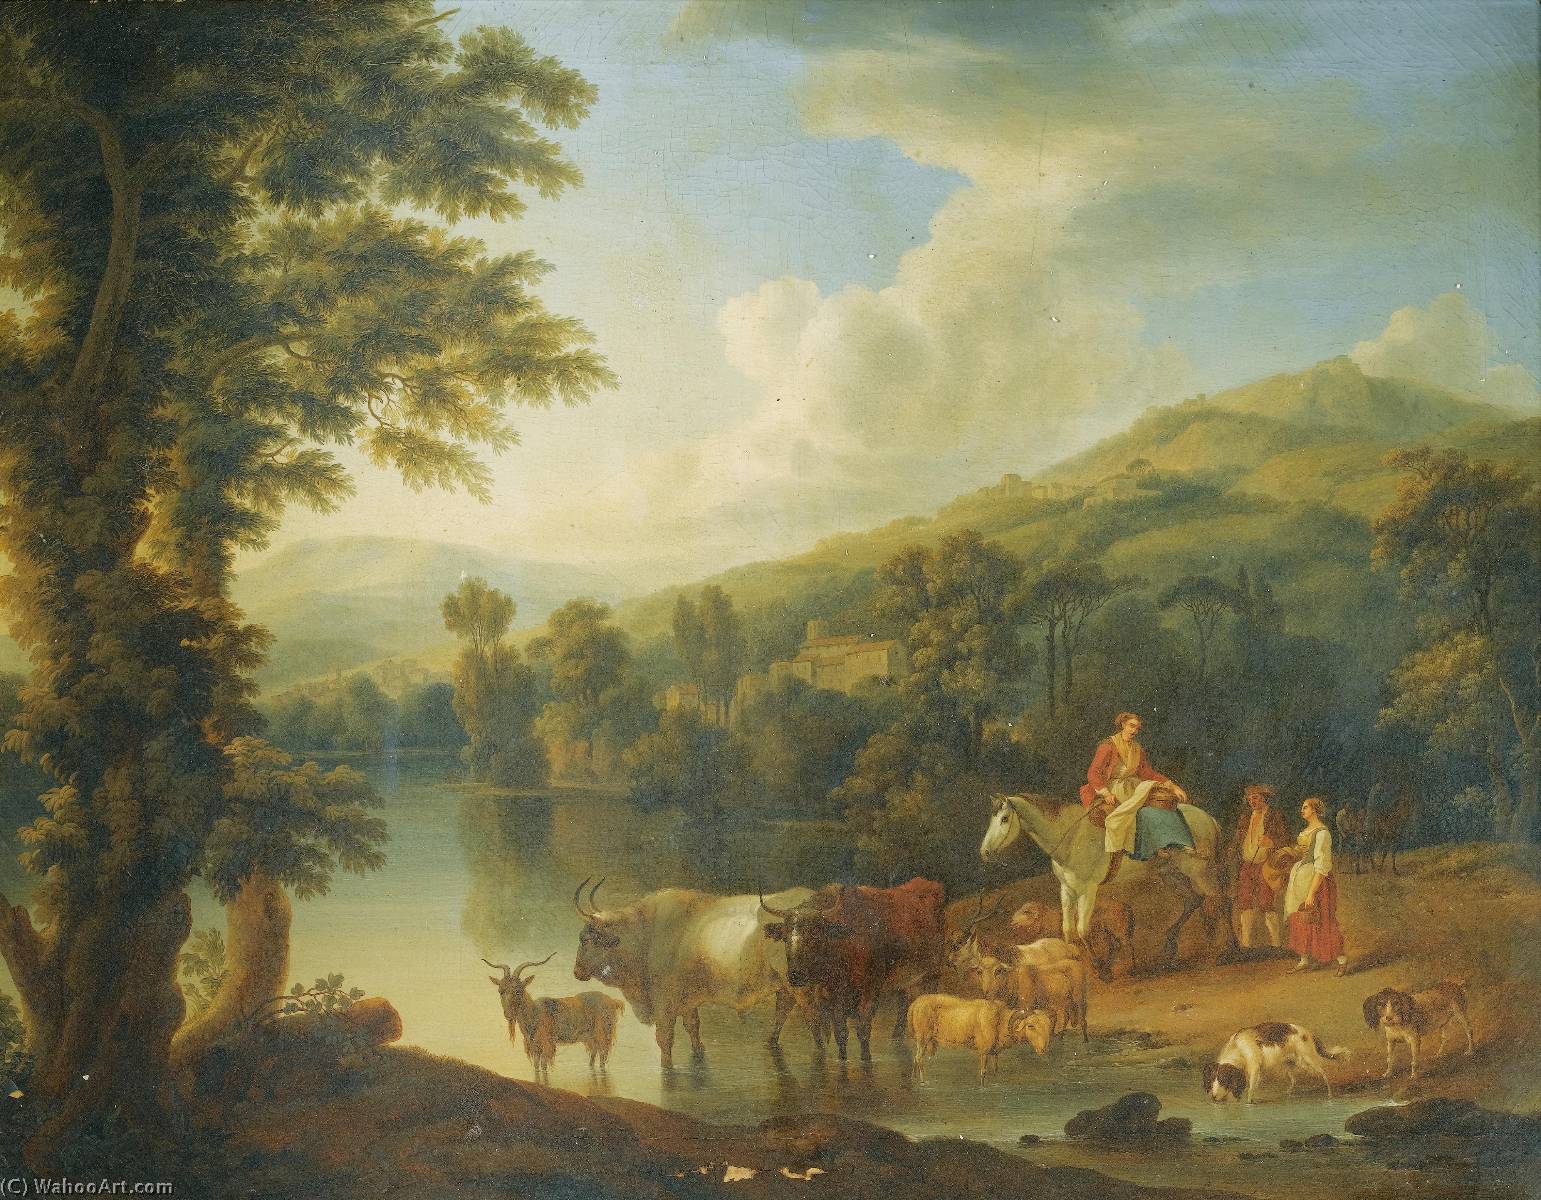 Buy Museum Art Reproductions A Wooded River Landscape with a Woman on a grey horse with animals watering A Wooded River Landscape with a shepherd resting beneath a tree by cows and goats by Jakob Philipp Hackert (1737-1807) | ArtsDot.com